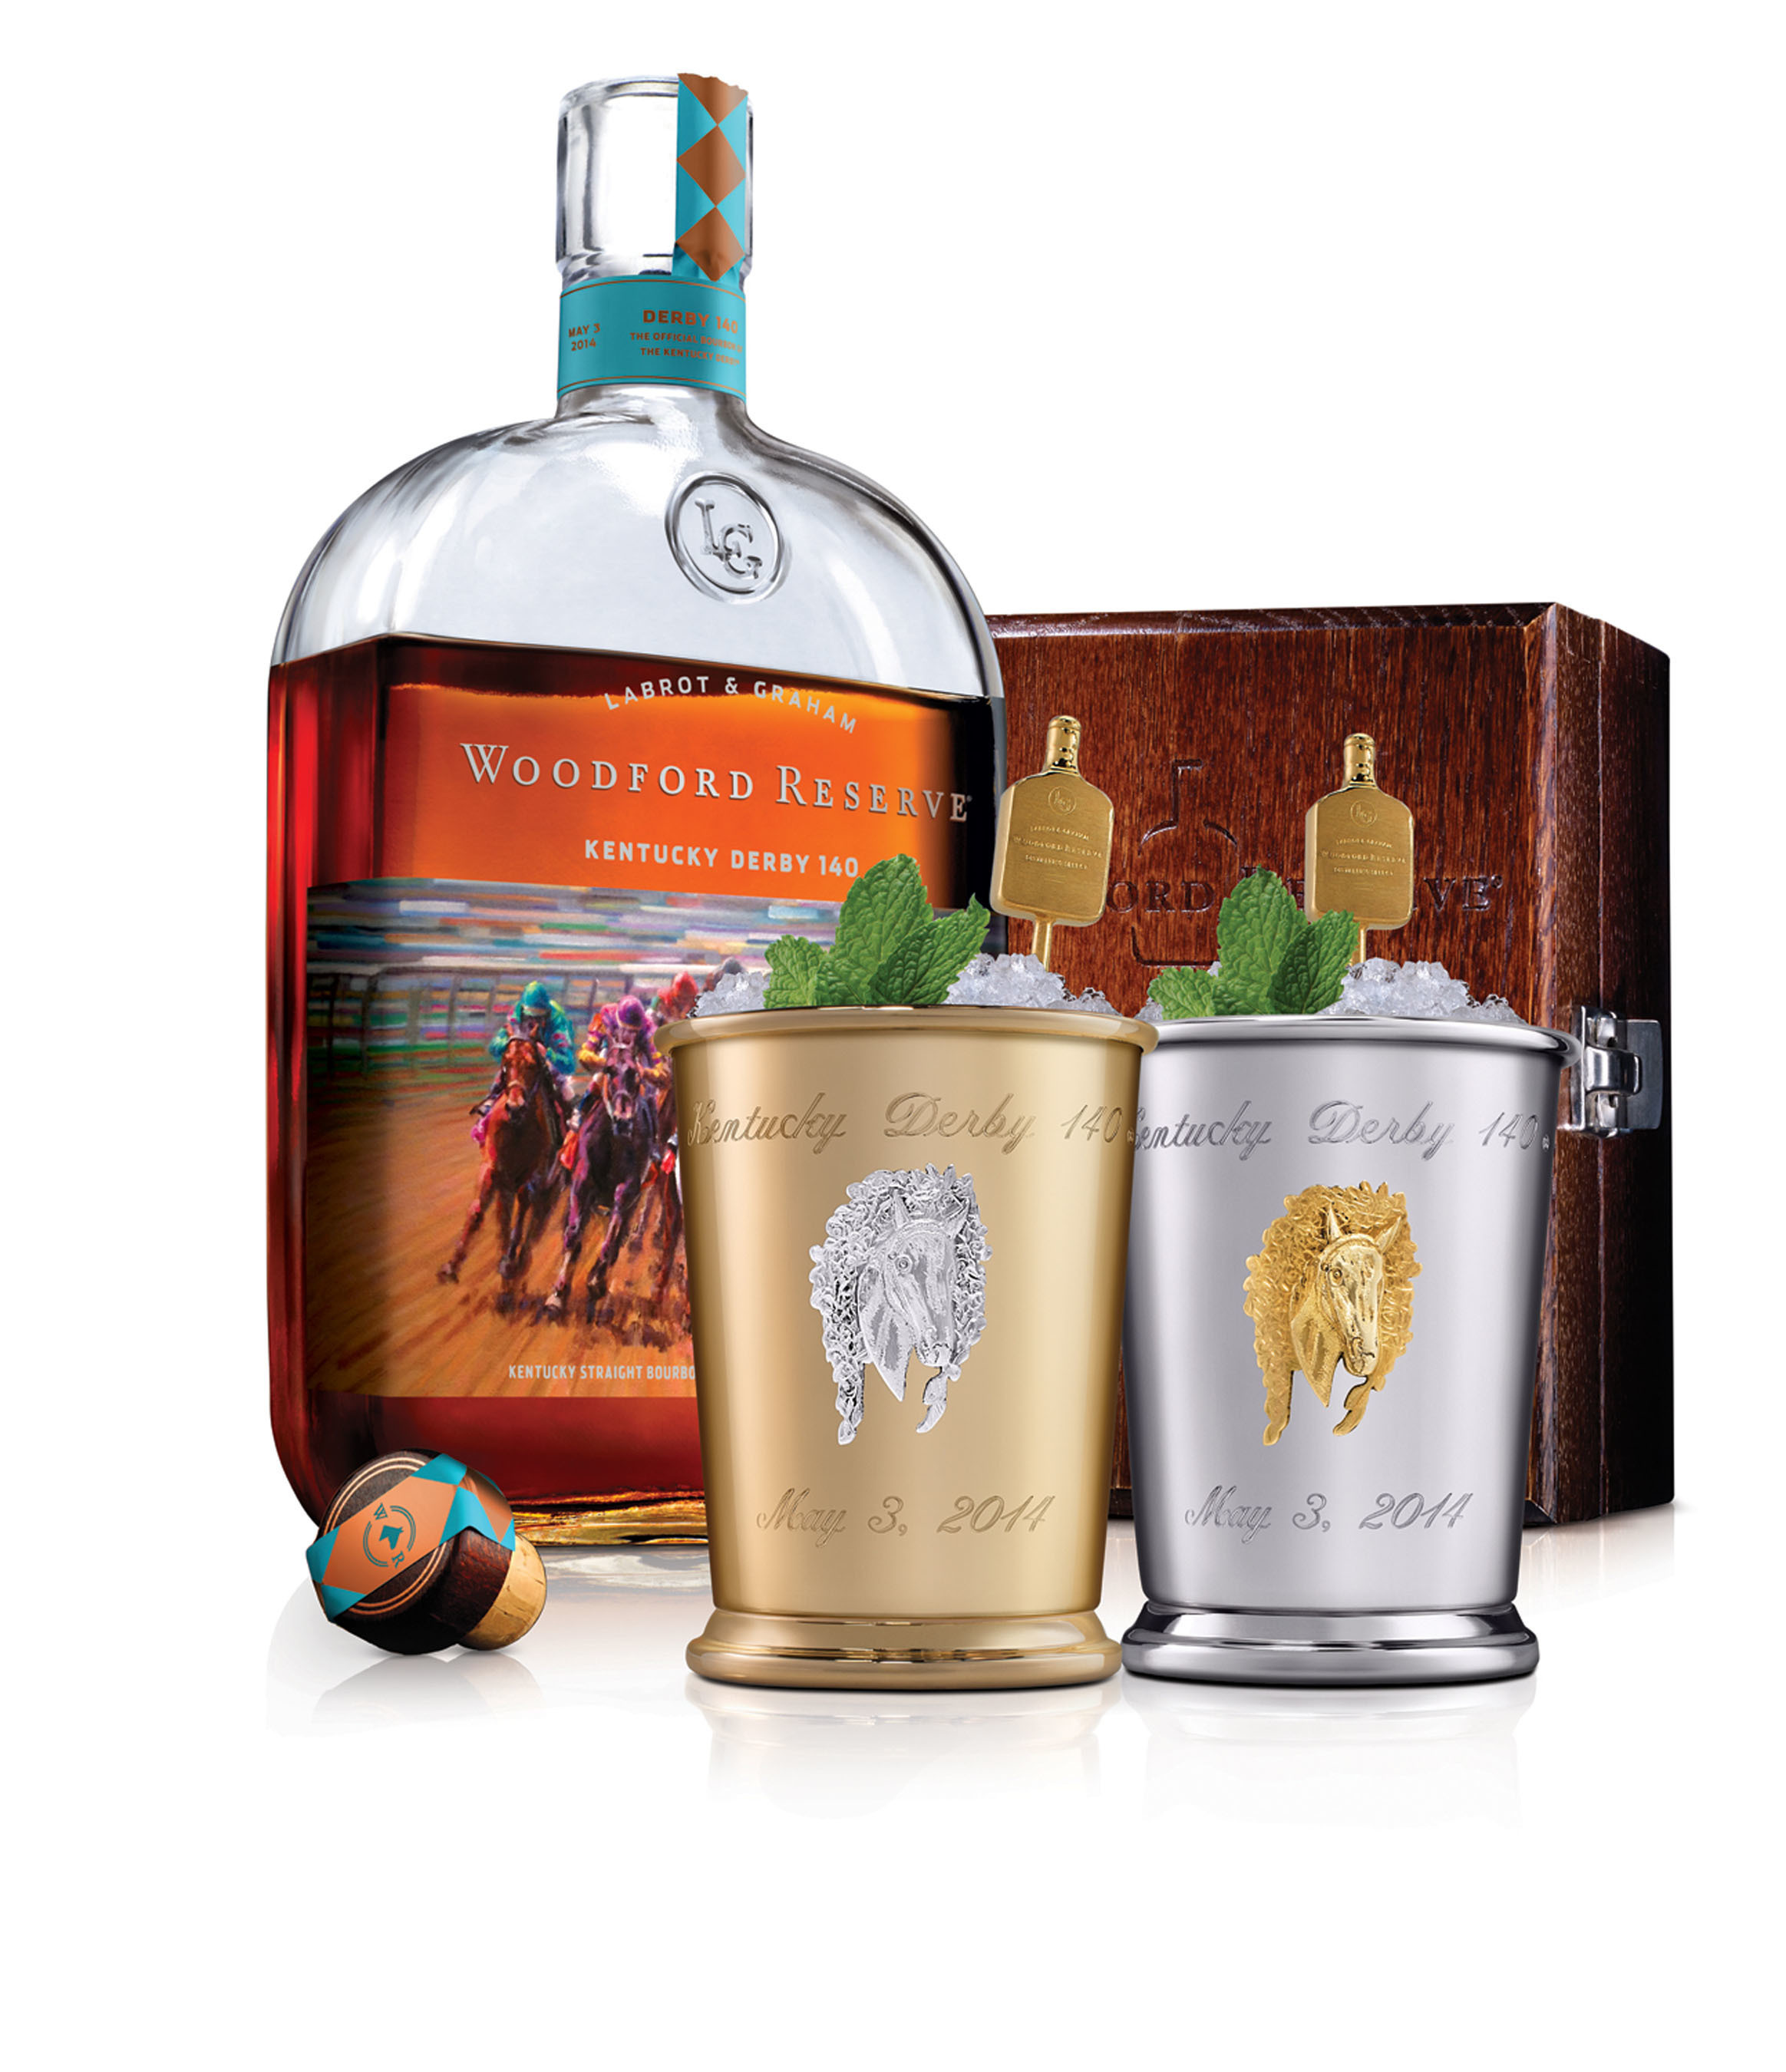 Woodford Reserve announces the $1,000 Mint Julep Cup for charity at the Kentucky Derby on May 3, 2014. Proceeds from the sales of these exclusive cups benefit Old Friends Thoroughbred Retirement Center. (PRNewsFoto/Woodford Reserve)